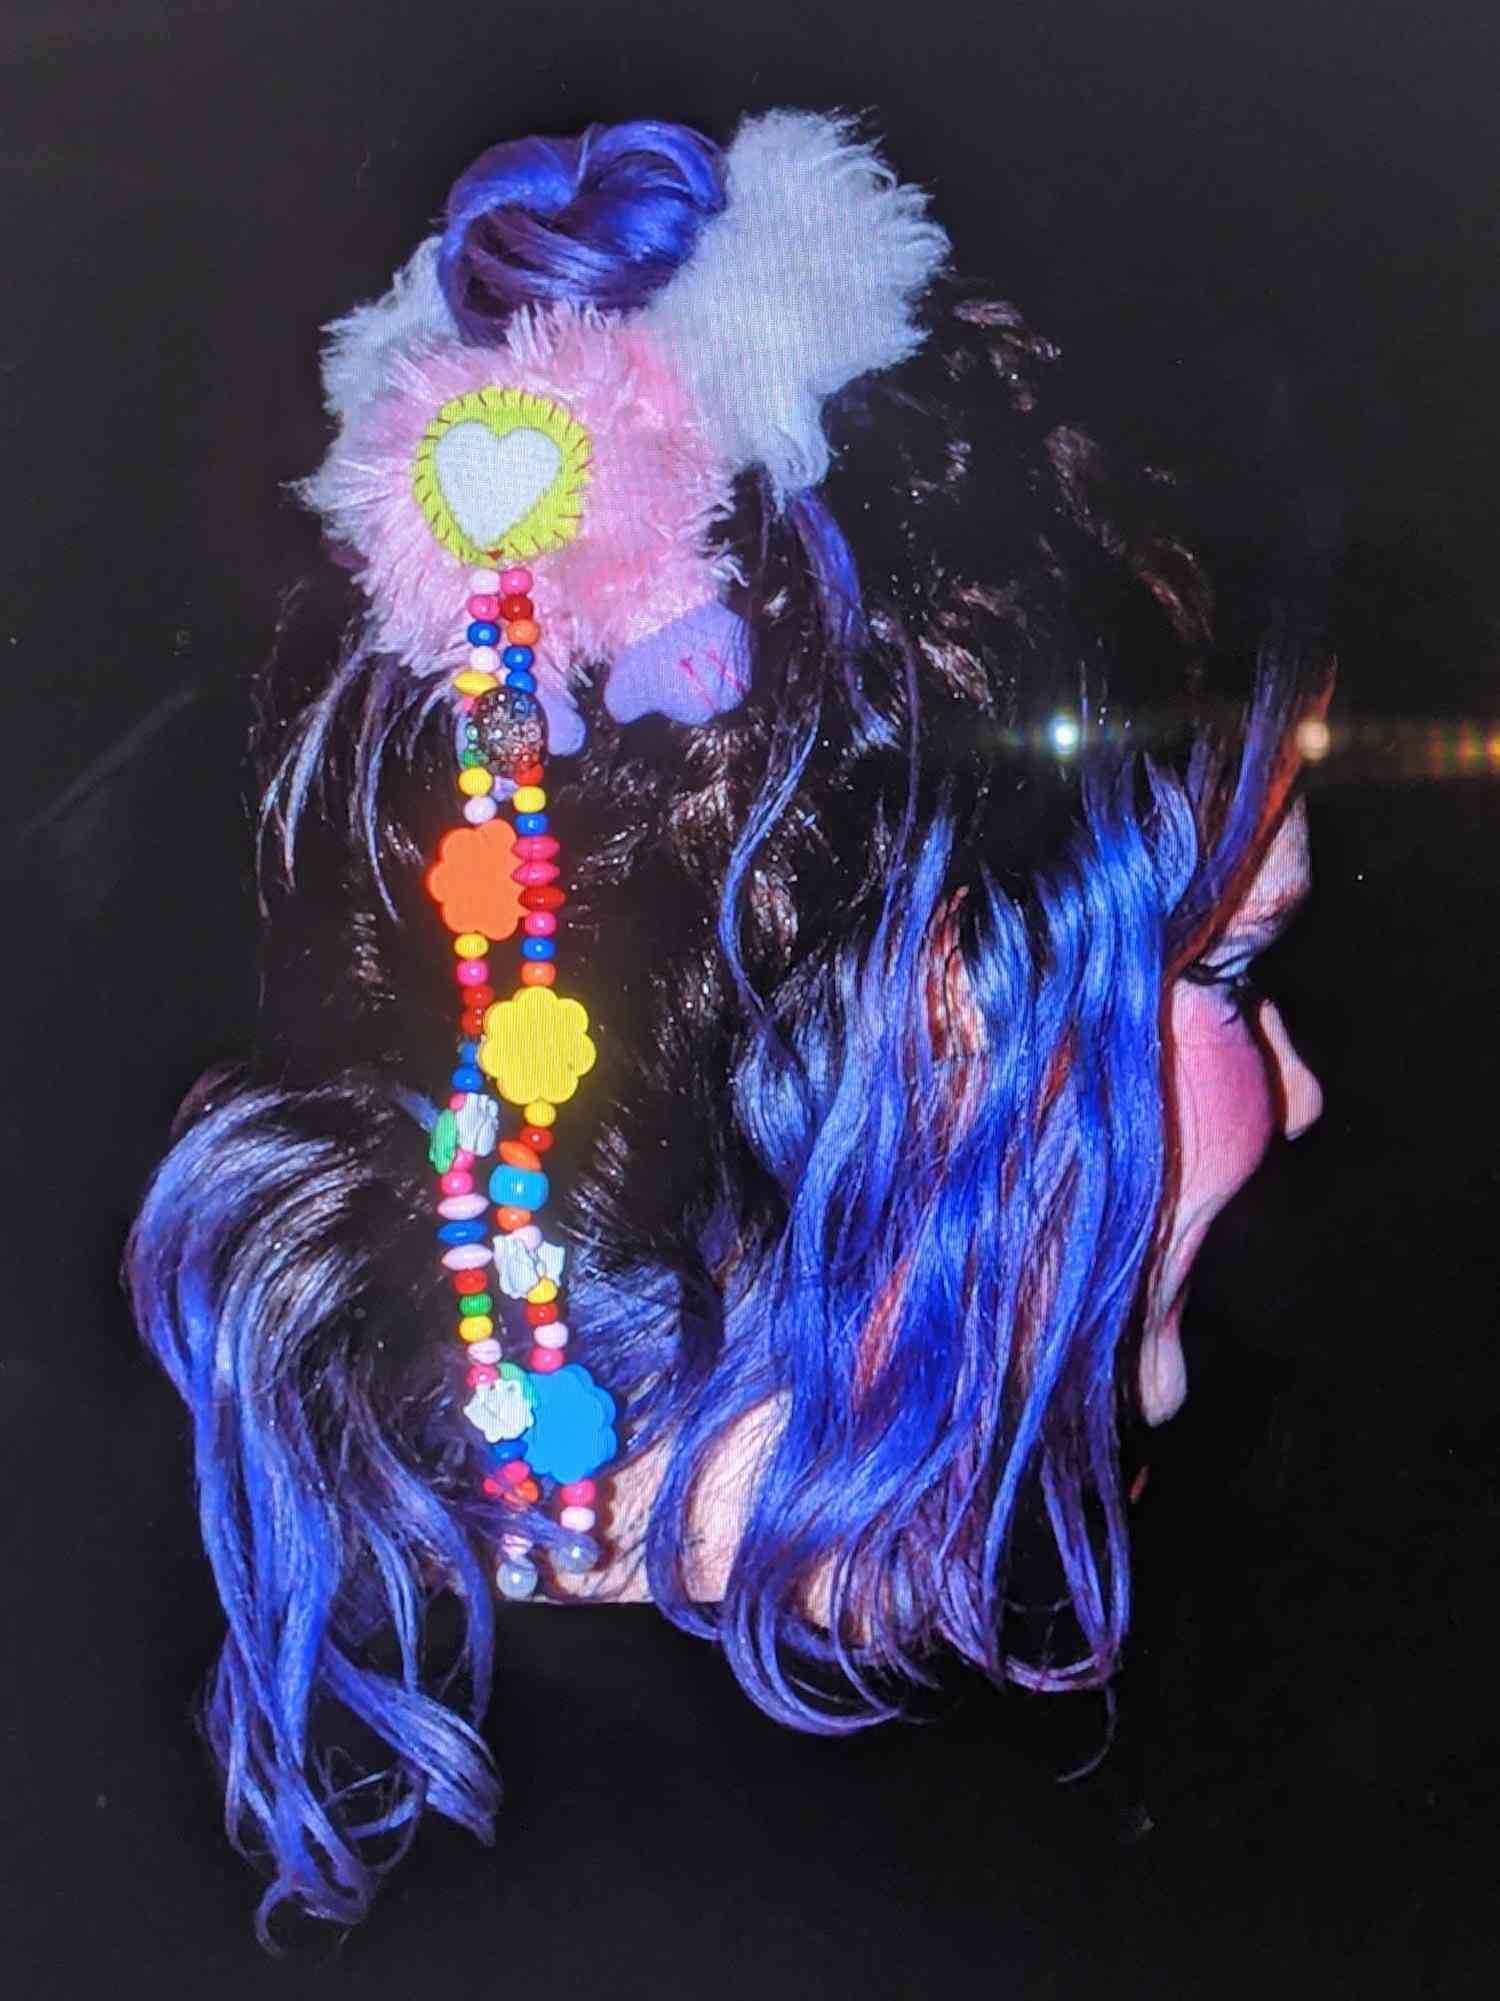 claire barrow, hair accessories, scrunchies, hair extensions, hair pieces, raver hair, harajuku hair, jfashion, rave accessories, CB, independent artist, independent designer